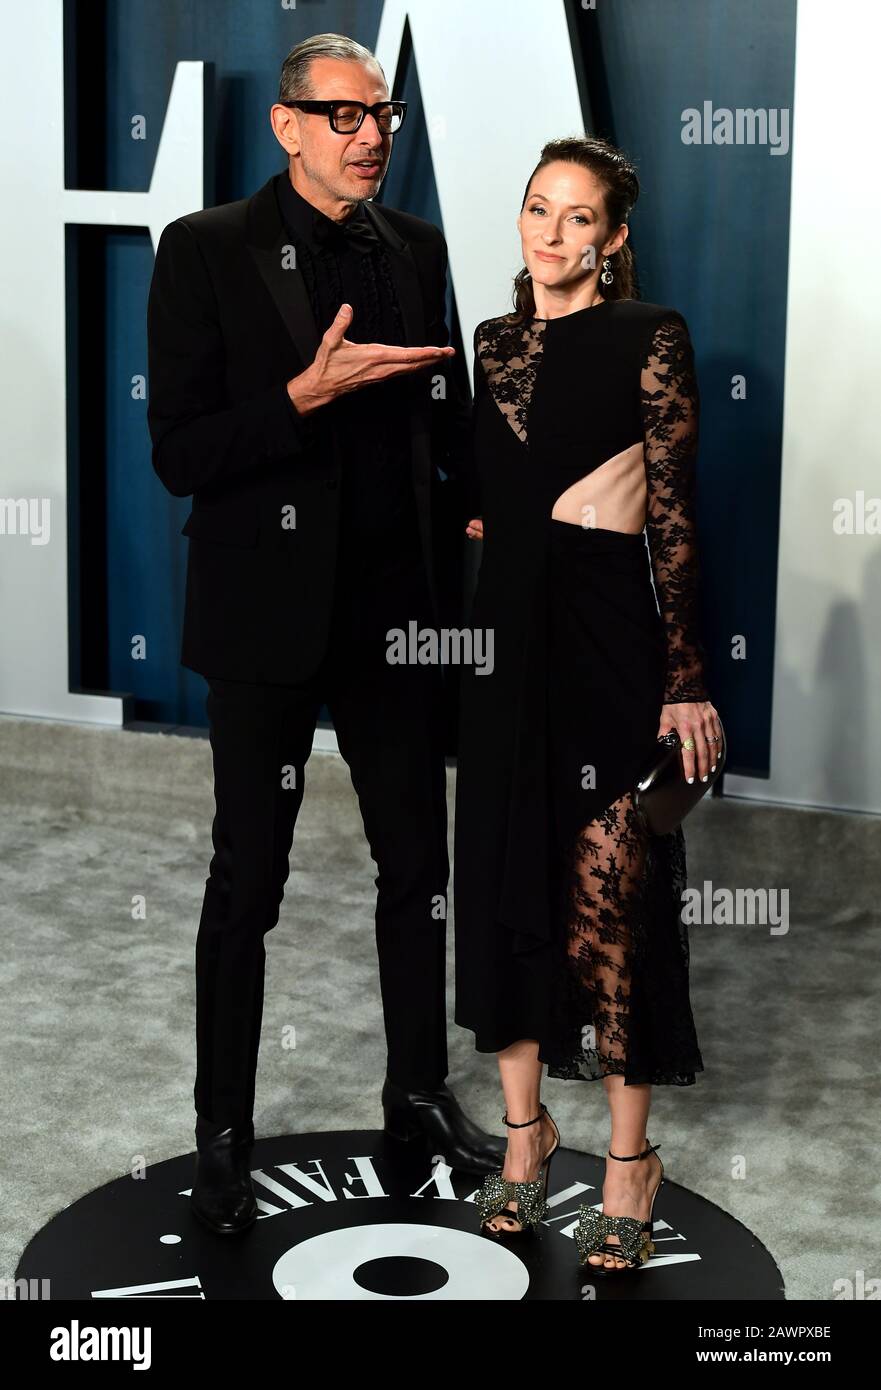 Jeff Goldblum and Emilie Livingston attending the Vanity Fair Oscar Party held at the Wallis Annenberg Center for the Performing Arts in Beverly Hills, Los Angeles, California, USA. Stock Photo